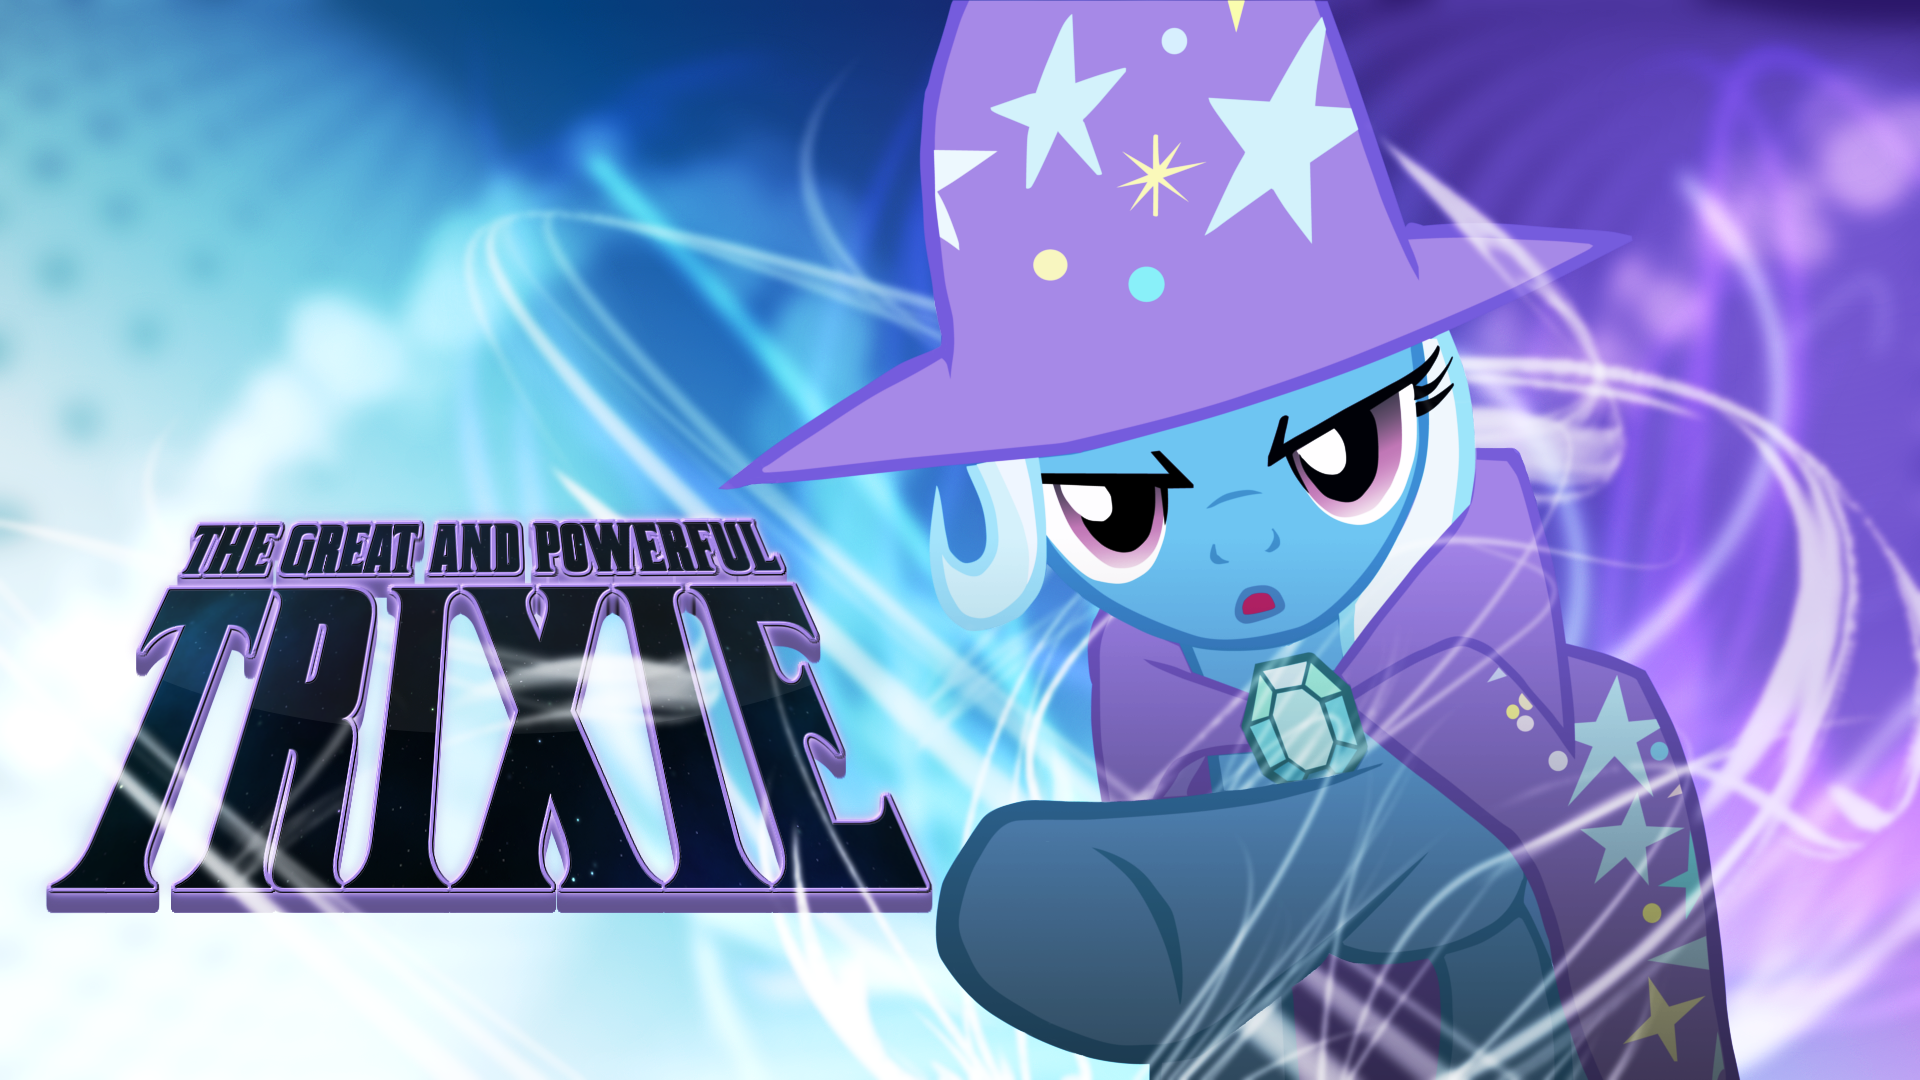 Trixie and her awesome Magic - Wallpaper by Immolation-of-Senses and Tadashi--kun